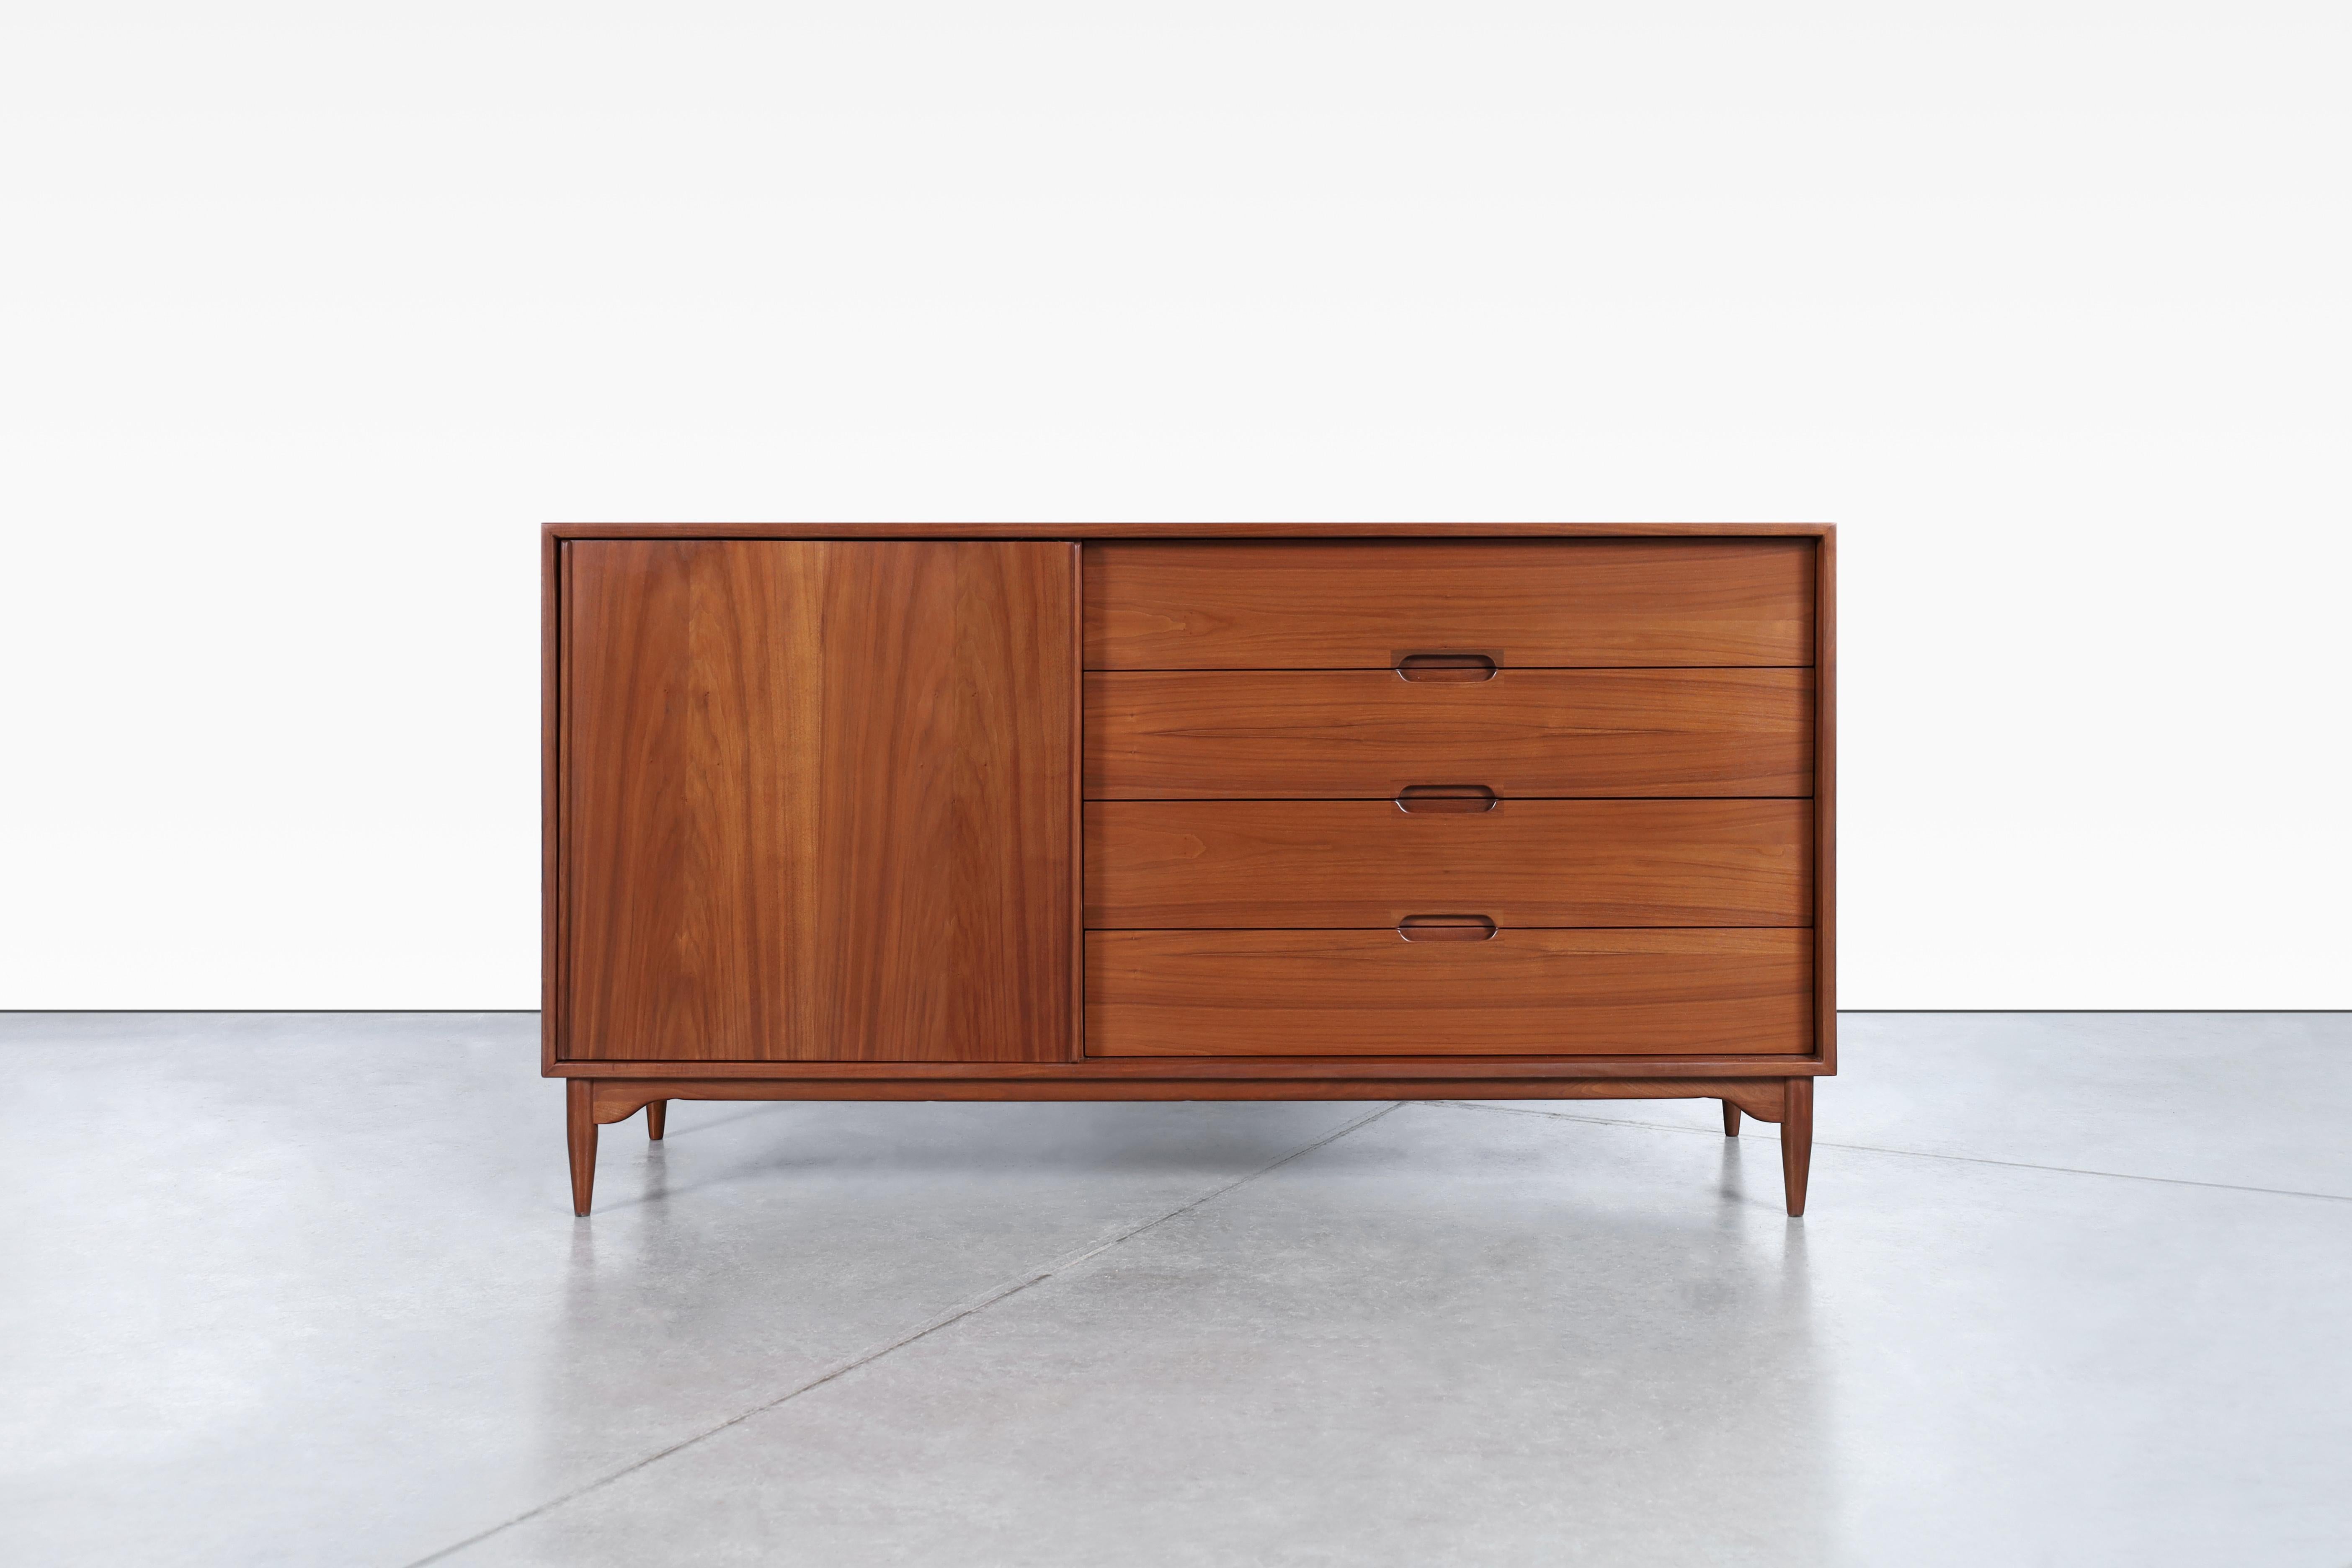 Stunning mid-century modern walnut credenza designed by John Keal for Brown Saltman in the United States, circa 1950s. Features a beautiful and sculptural walnut base lending an air of modernism to the entire piece. Its sinuous curves and organic